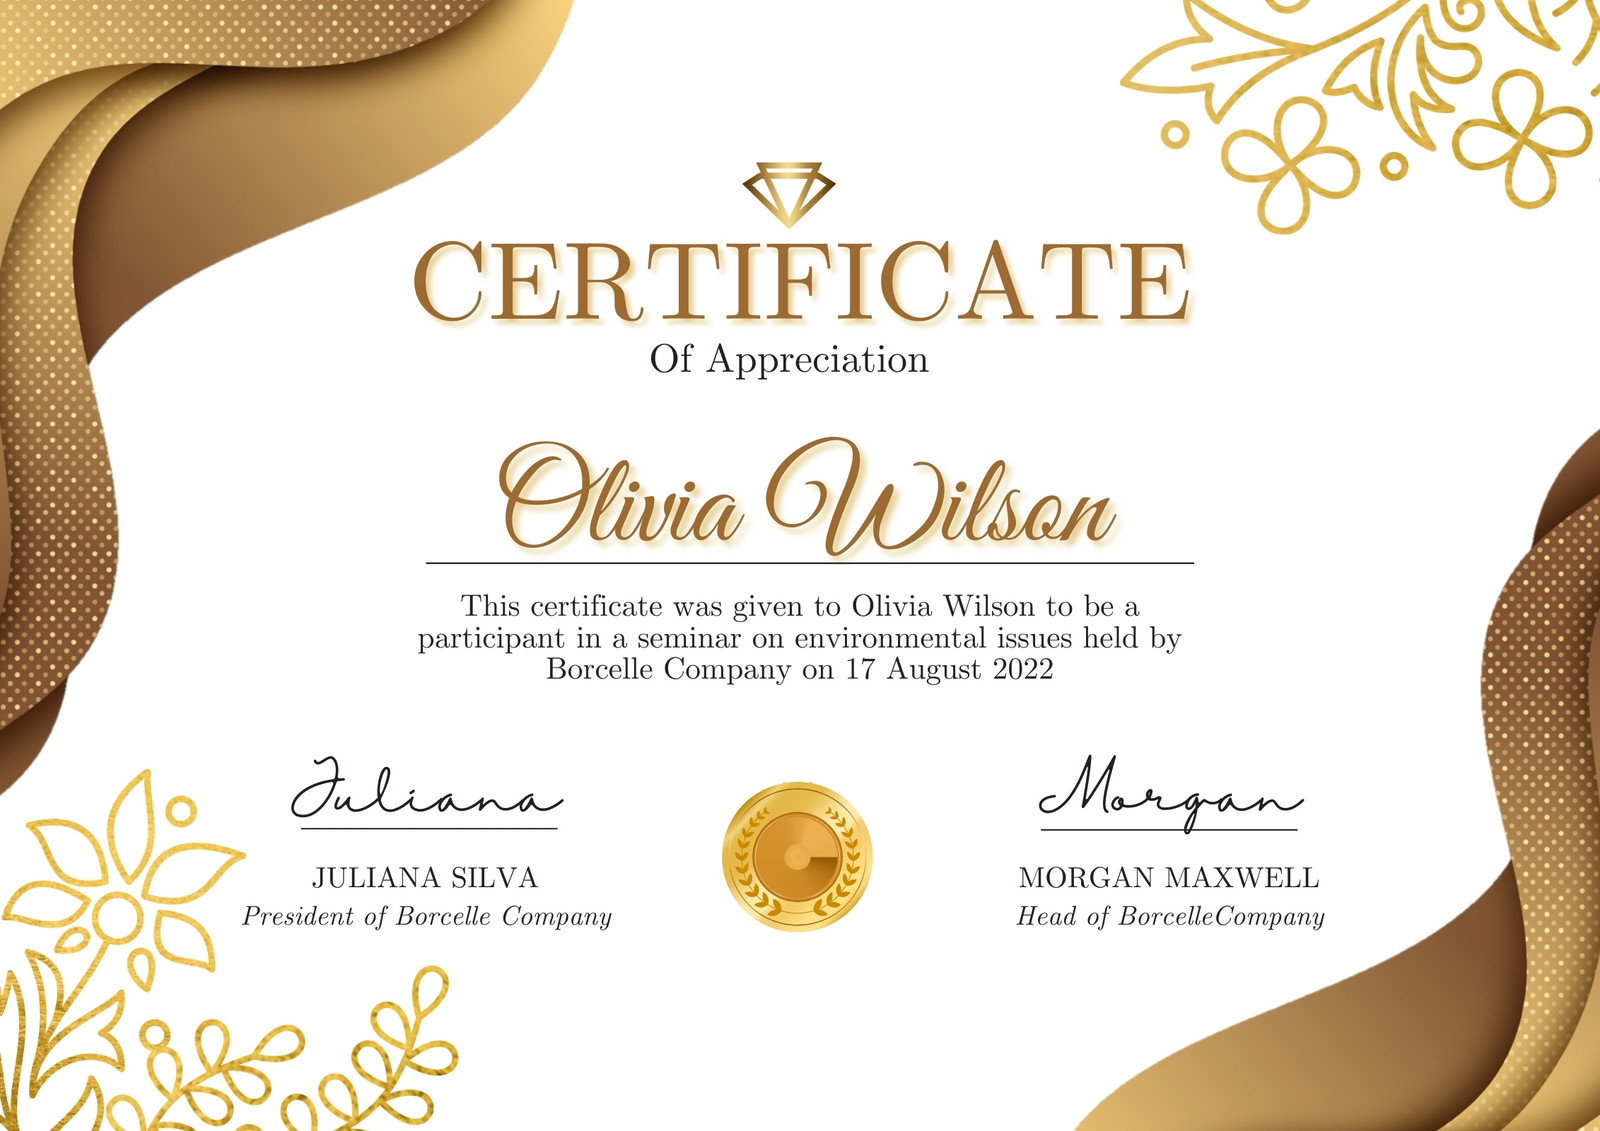 Free printable certificate templates you can customize | Canva